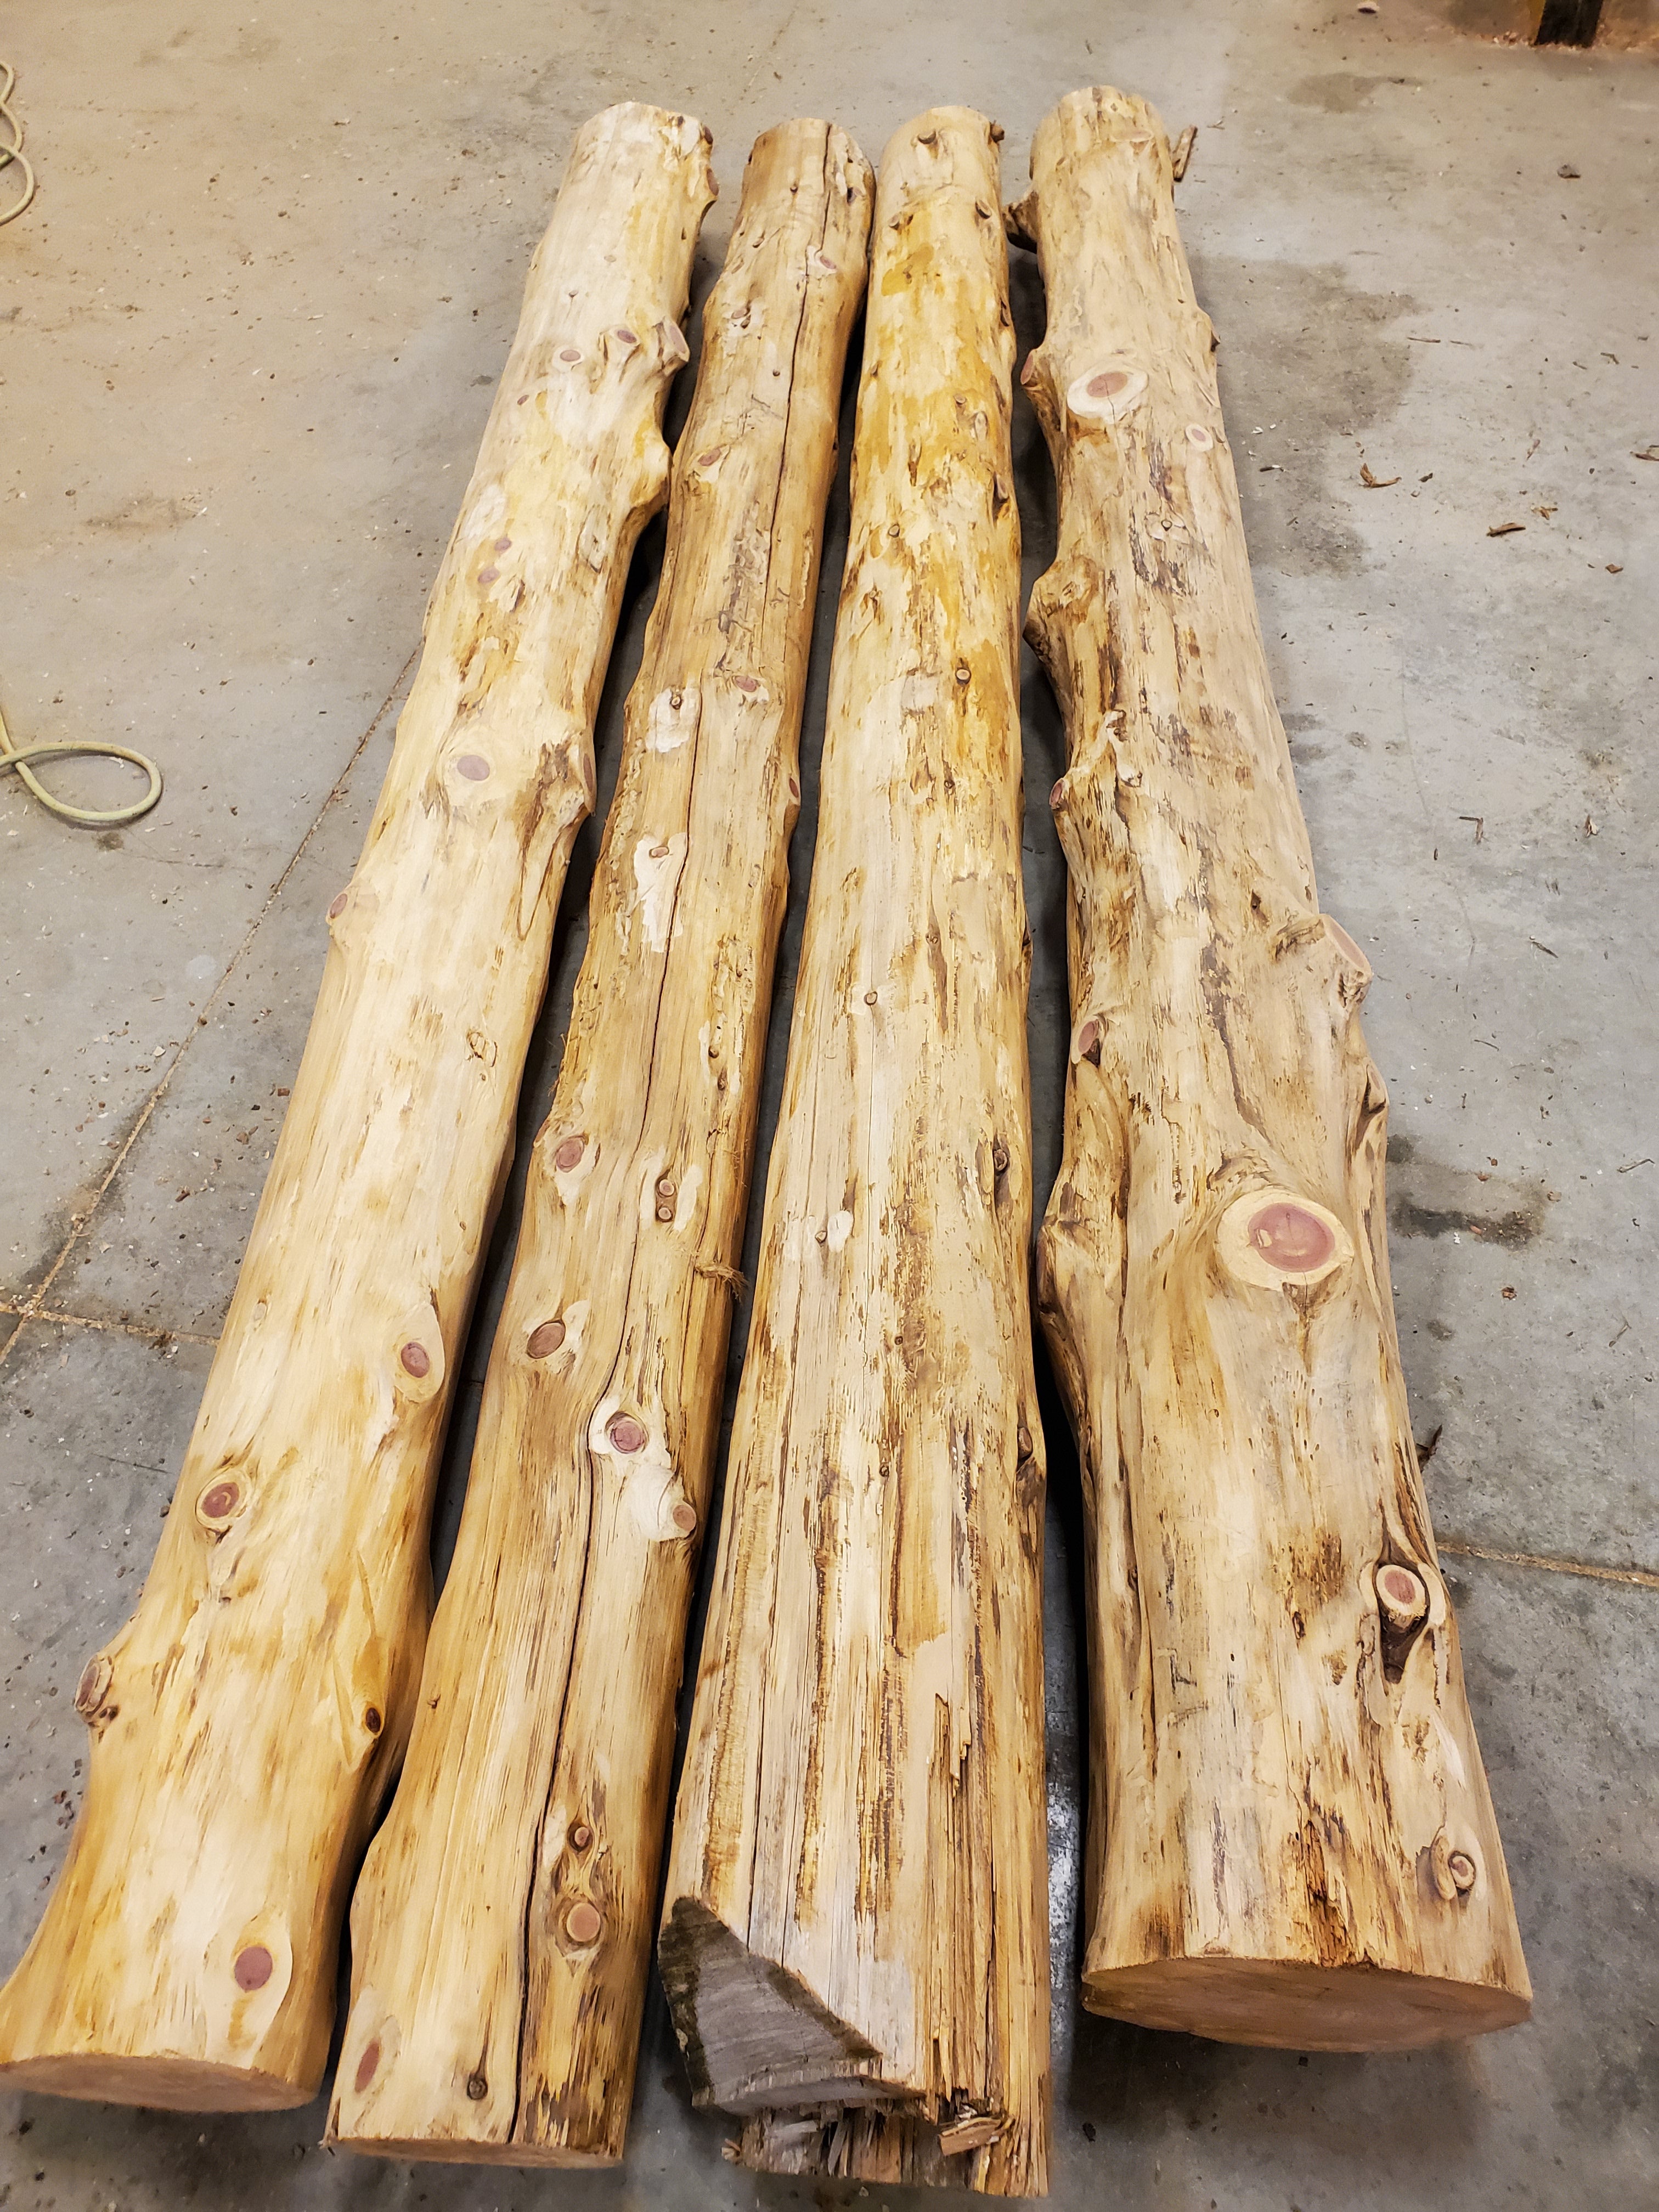 Round Timber Wood POPULAR WOOD LOGS, for Furniture at Rs 400/cubic